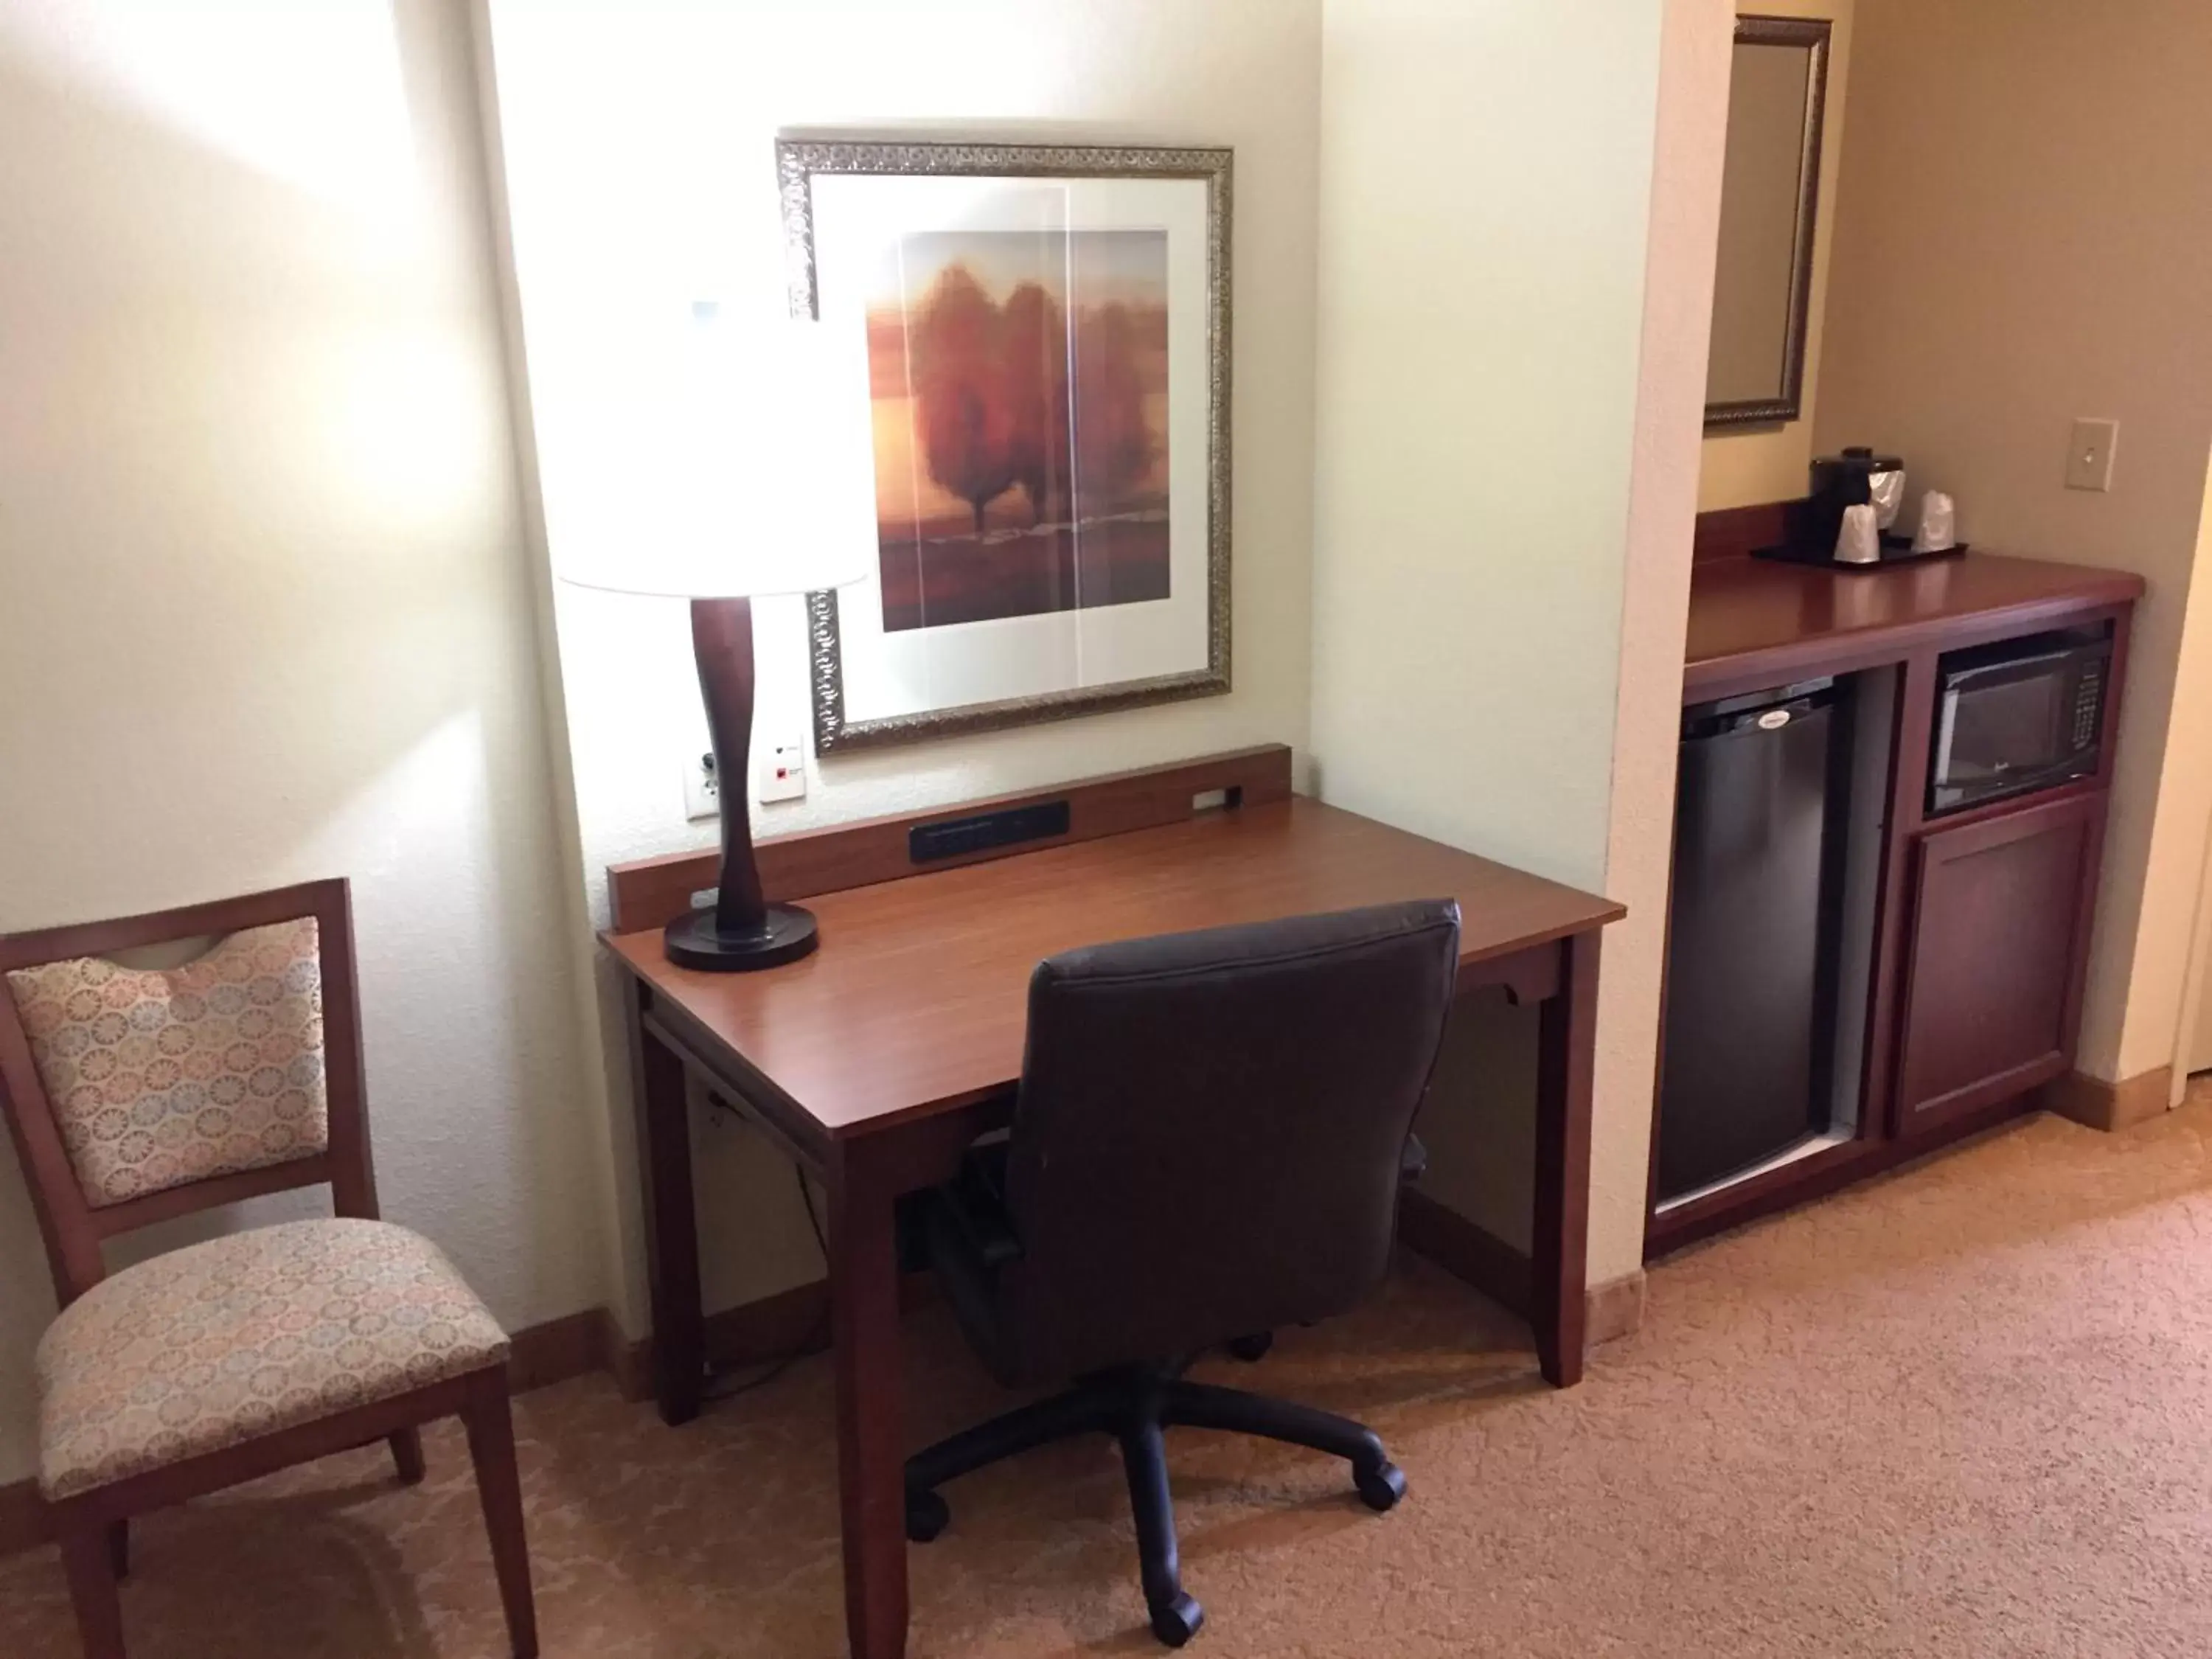 oven, TV/Entertainment Center in Country Inn & Suites Atlanta Downtown